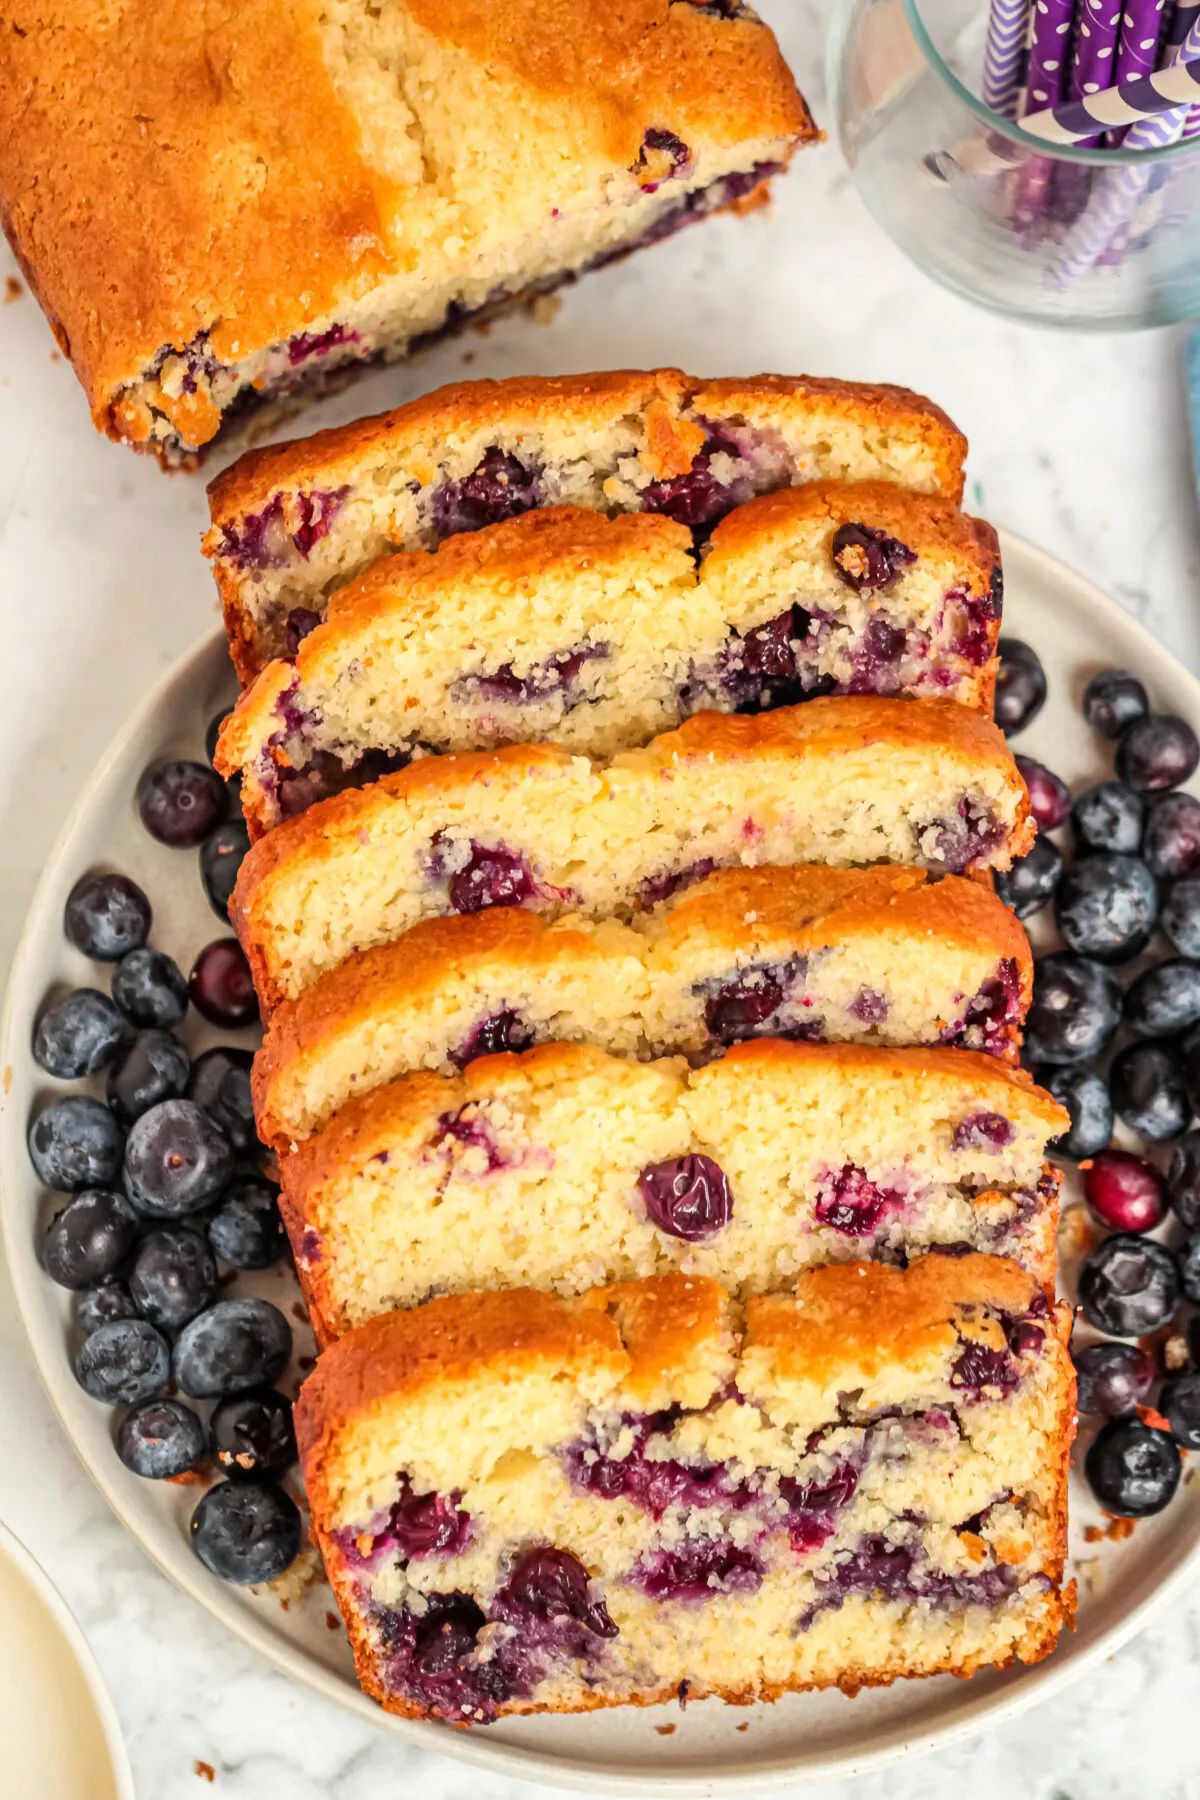 This Blueberry Muffin Bread is a favourite blueberry bread recipe in our family that is moist, fluffy and packed full of juicy blueberries.